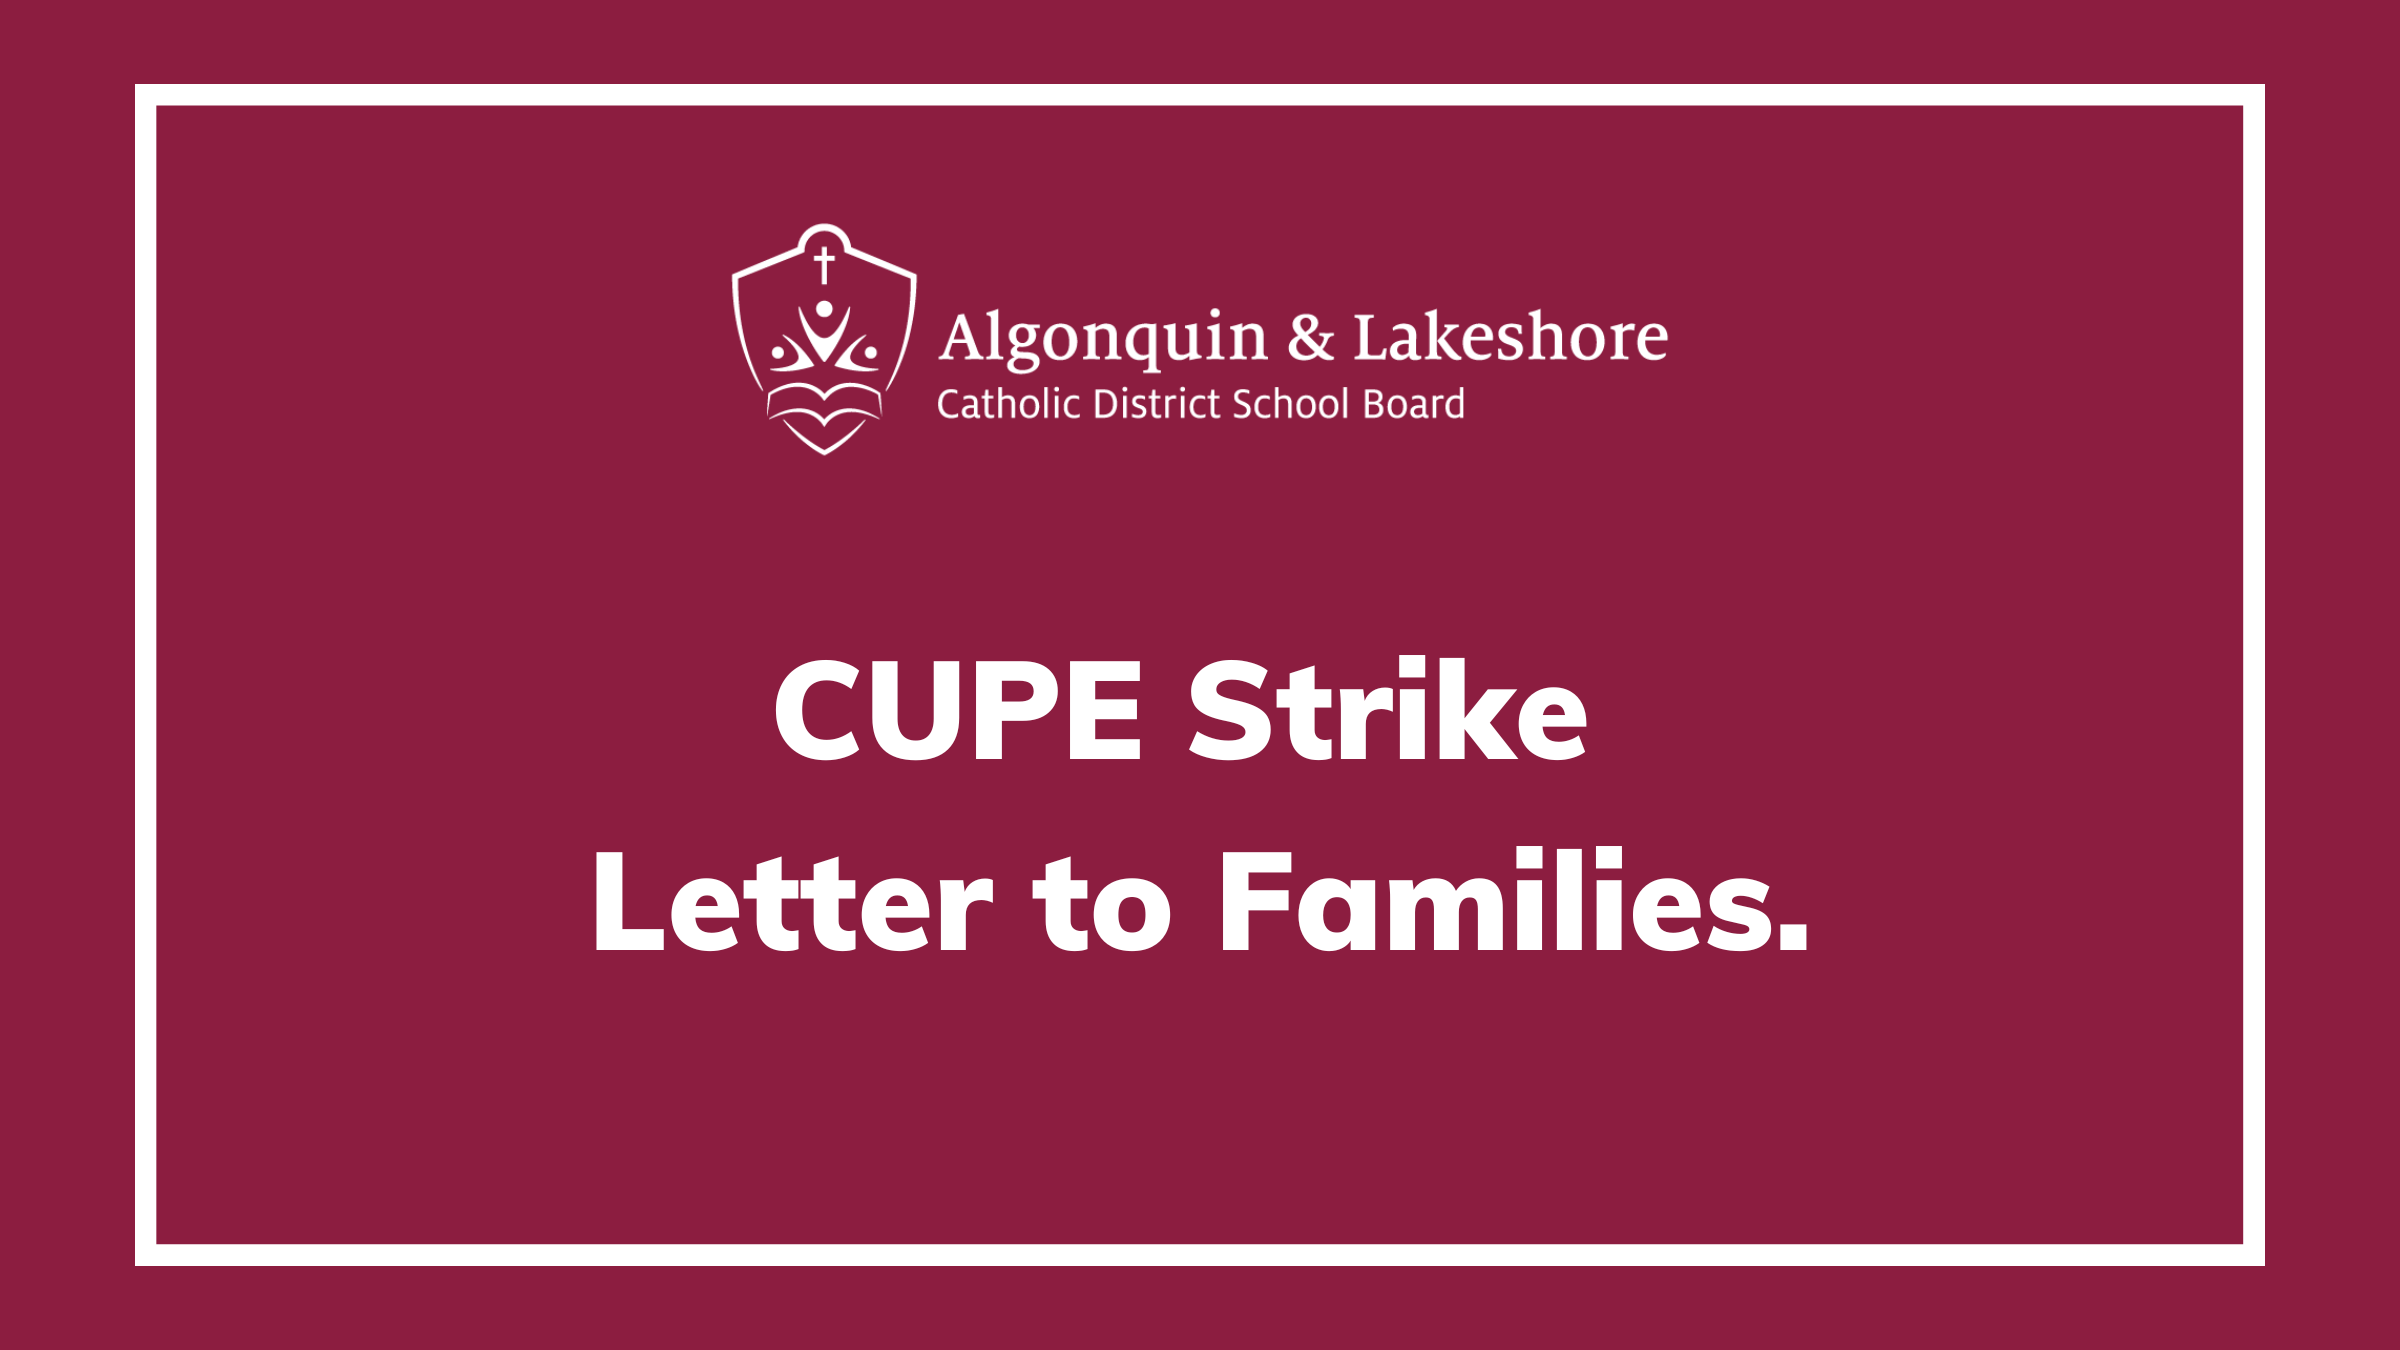 Text over burgundy background "CUPE Strike Letter to Faamilies"